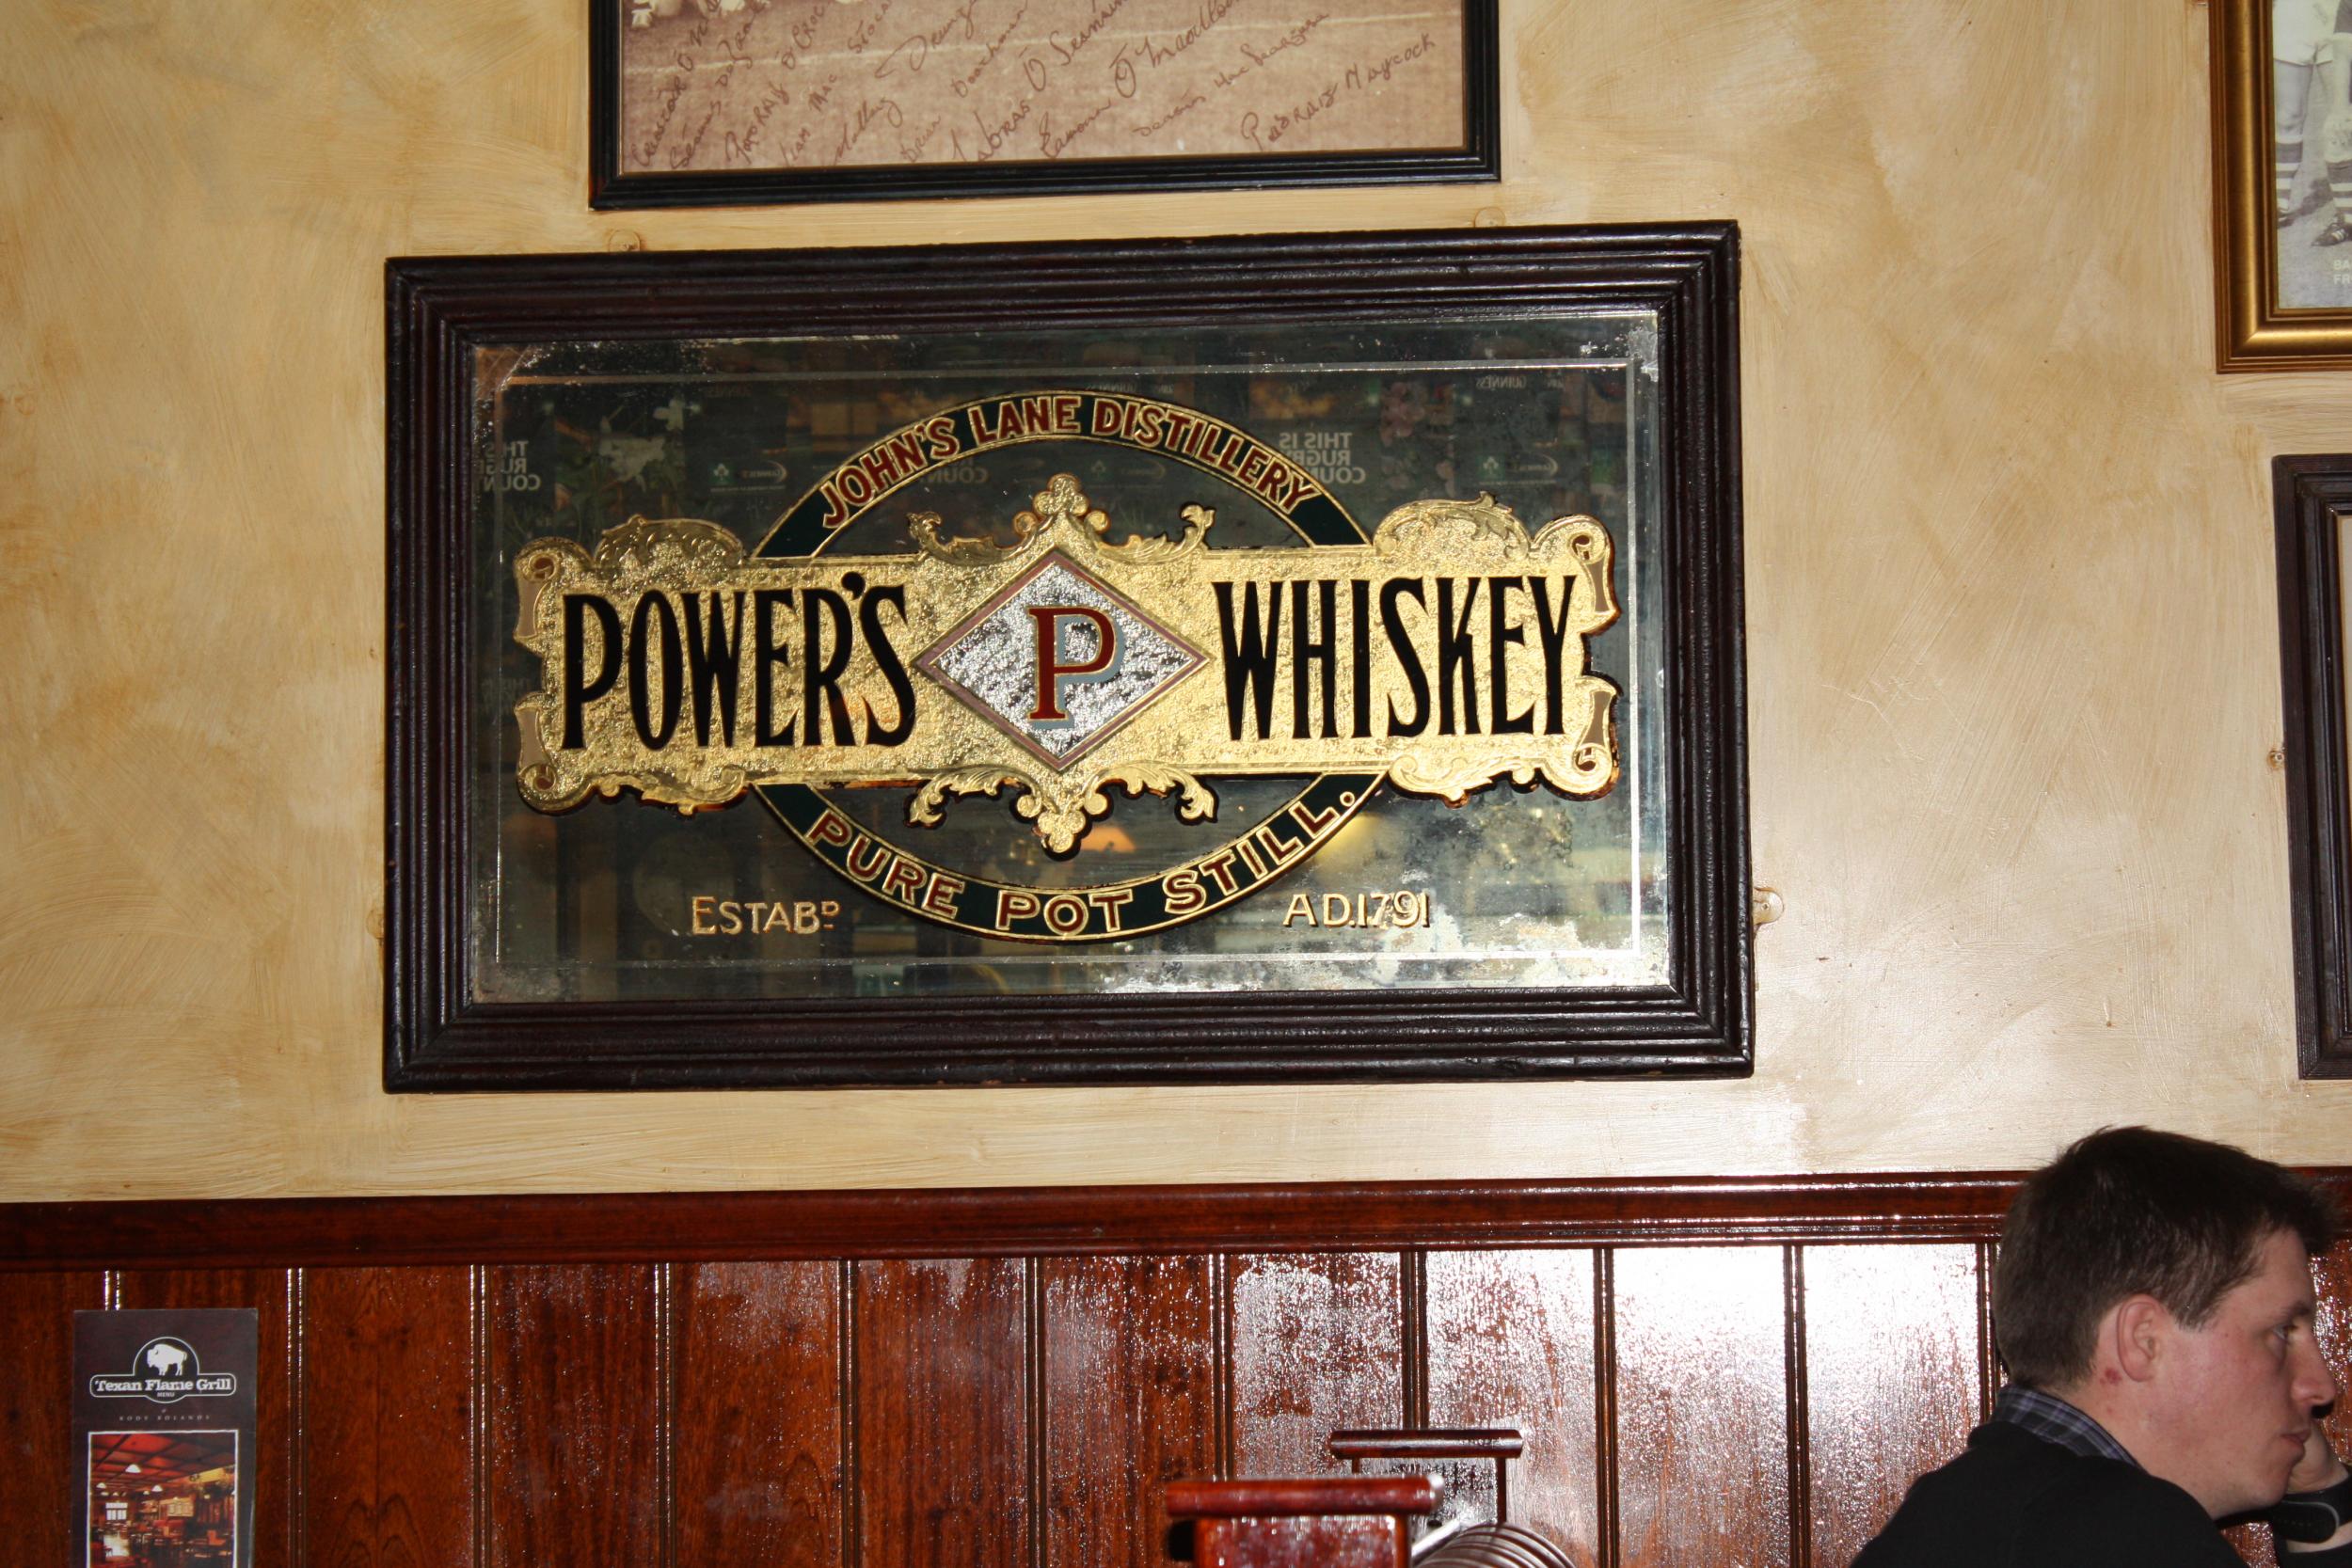 Power's Whiskey mirror in a pub